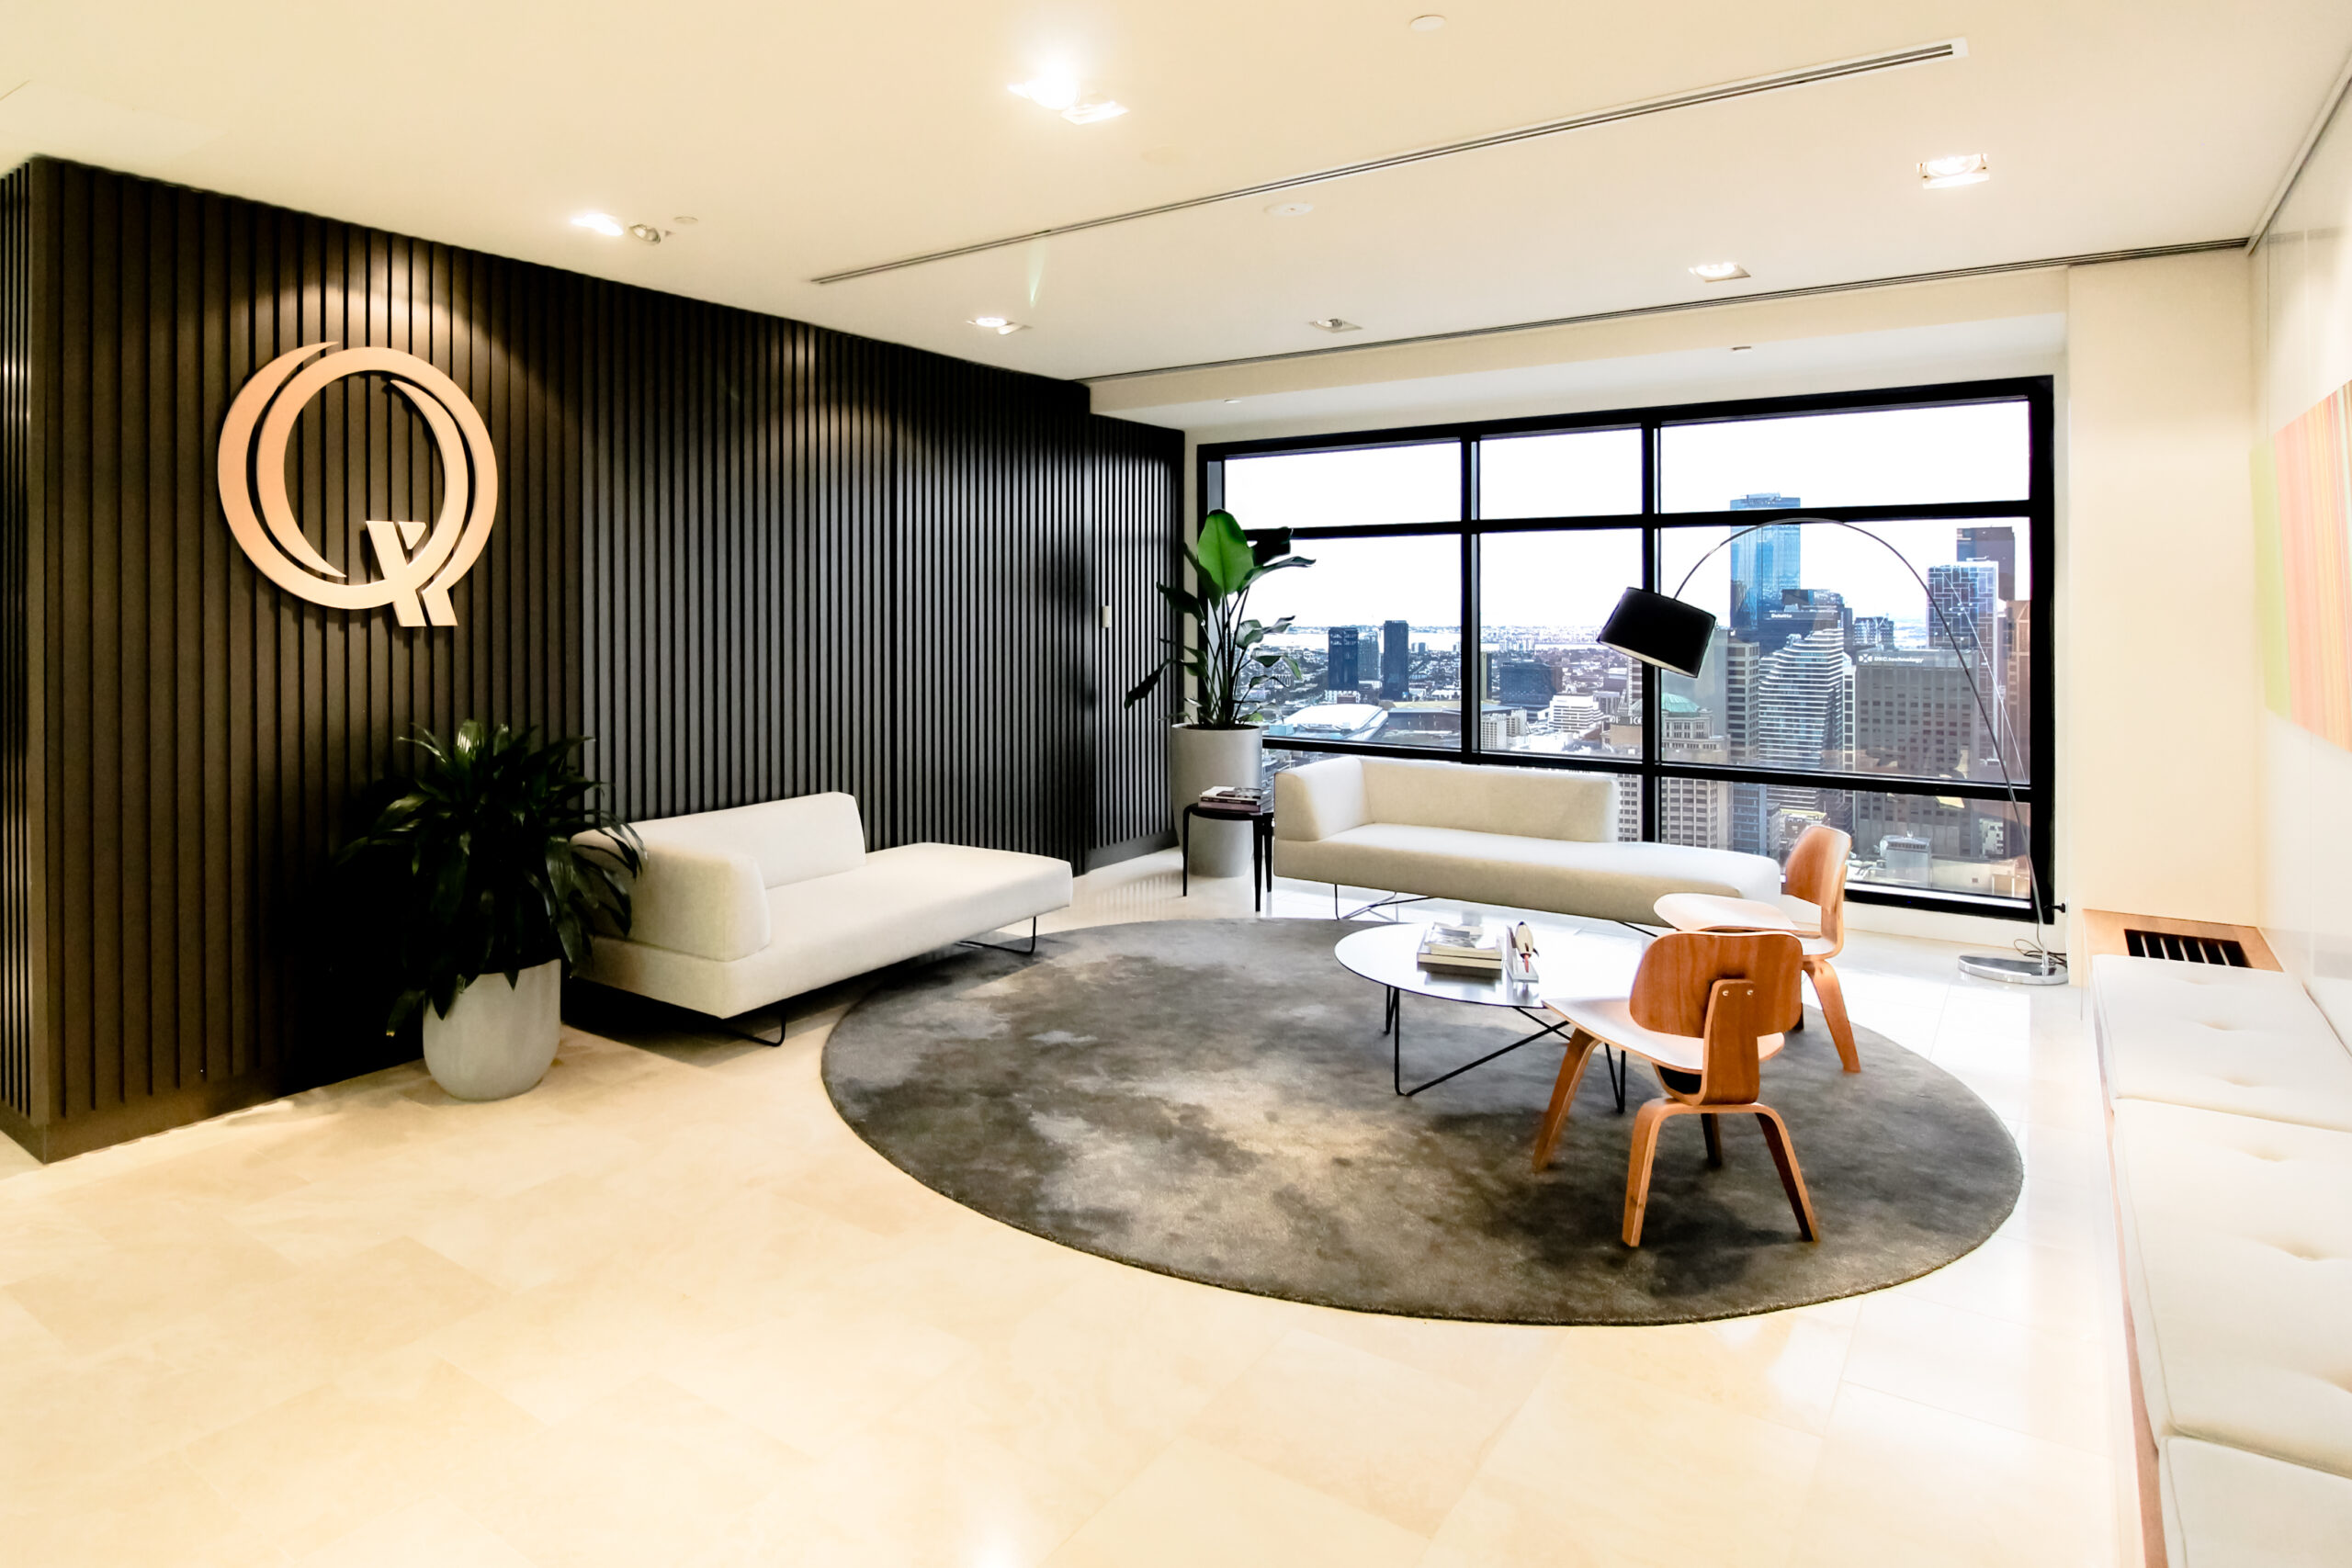 Qualitas Reception Area - a mid-century inspired space with classic funiture sits on a round rug, alongside is a bench seat - a project by Office Vision